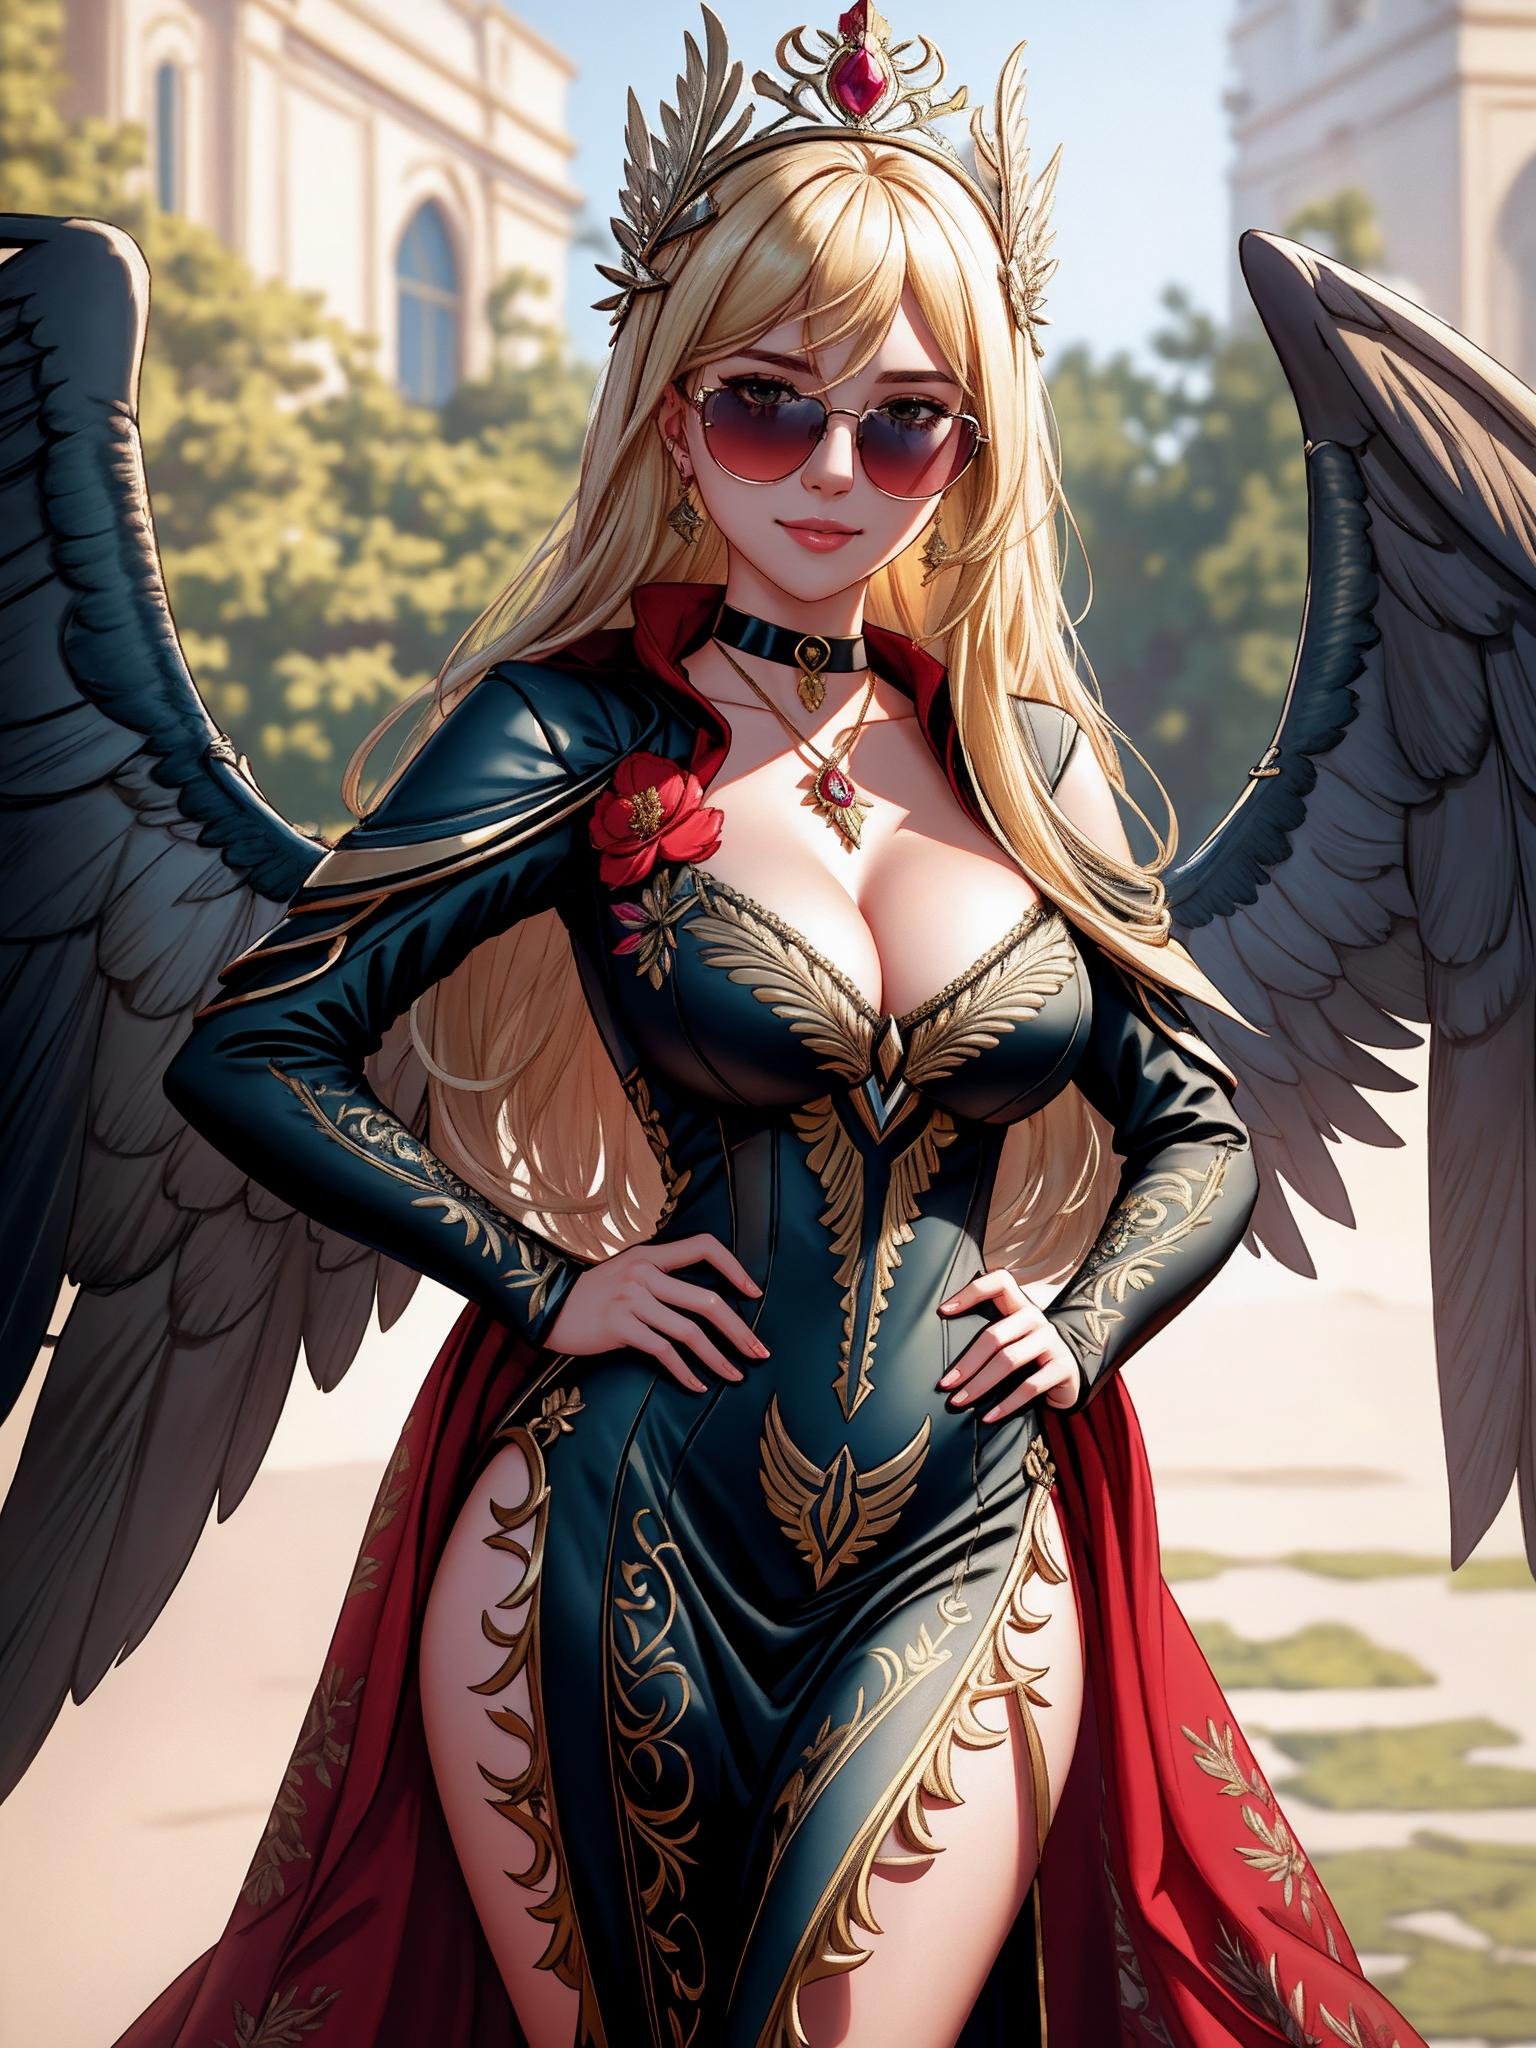 ((Masterpiece, best quality,photography, detailed skin, realistic, photo-realistic, 8k, highly detailed, full length frame, High detail RAW color art, diffused soft lighting, shallow depth of field, sharp focus, hyperrealism, cinematic lighting,close up)),smiling(edgGaruda_dress:1.2),Haute_Couture, a  bird_woman wearing [Haute_Couture|edgGaruda_dress]  designer dress ,ruby crown, floral embroidery,hand on hip,Blonde nadia with sunglasses and a choker <lora:edgLycorisGaruda:0.8> <lora:Ultimate_Nadia:0.5>